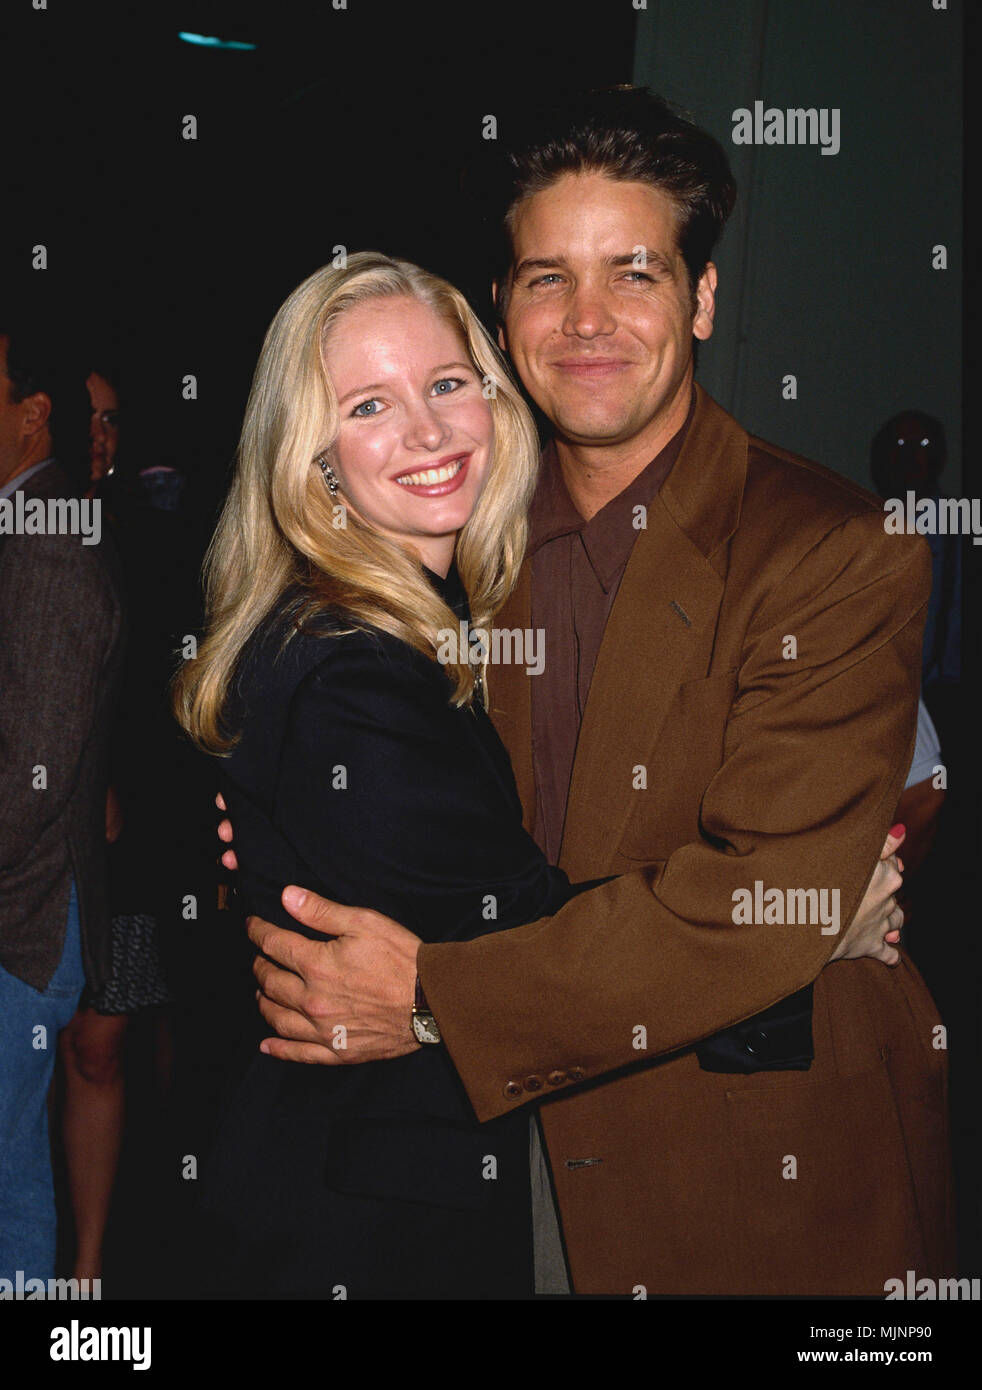 1992 --- Bell and Damian attend the 5000th episode celebration for the soap opera television show The Young & the Restless. --- ' Tsuni / Bourquard 'Lauralee Bell and Michael Damian Lauralee Bell and Michael Damian Lauralee Bell and Michael Damian Event in Hollywood Life - California,  Red Carpet Event, Vertical, USA, Film Industry, Celebrities,  Photography, Bestof, Arts Culture and Entertainment, Topix  Celebrities fashion /  from the Red Carpet-1994-2000, one person, Vertical, Best of, Hollywood Life, Event in Hollywood Life - California,  Red Carpet and backstage, USA, Film Industry, Celeb Stock Photo